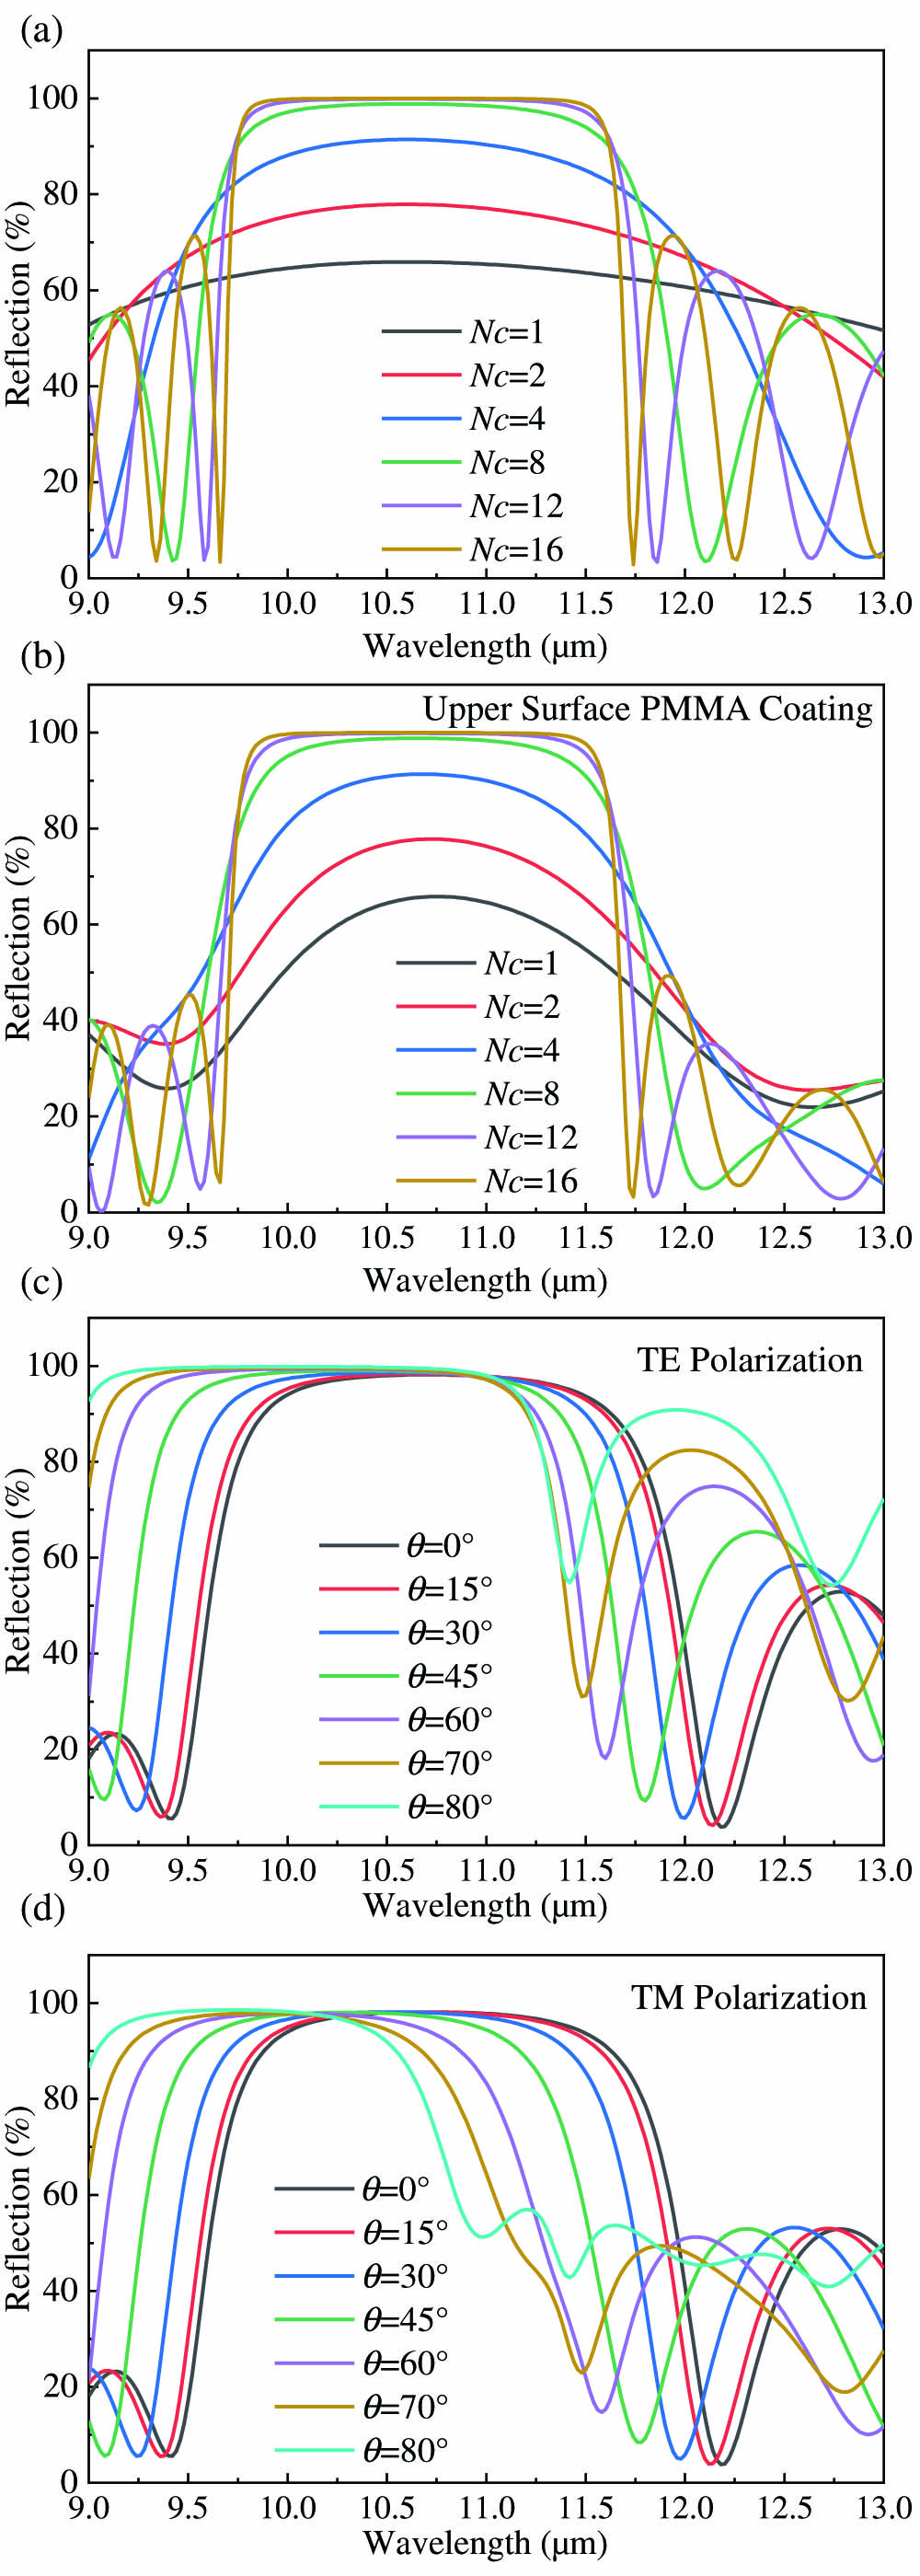 Structural parameter simulation. (a) Reflectance spectra of the structure without coating at different periods; (b) reflectance spectra of the structure with upper surface PMMA coating at different periods; (c) and (d) reflectance ranges for TE and TM polarization modes at different incident angles with upper surface PMMA coating.